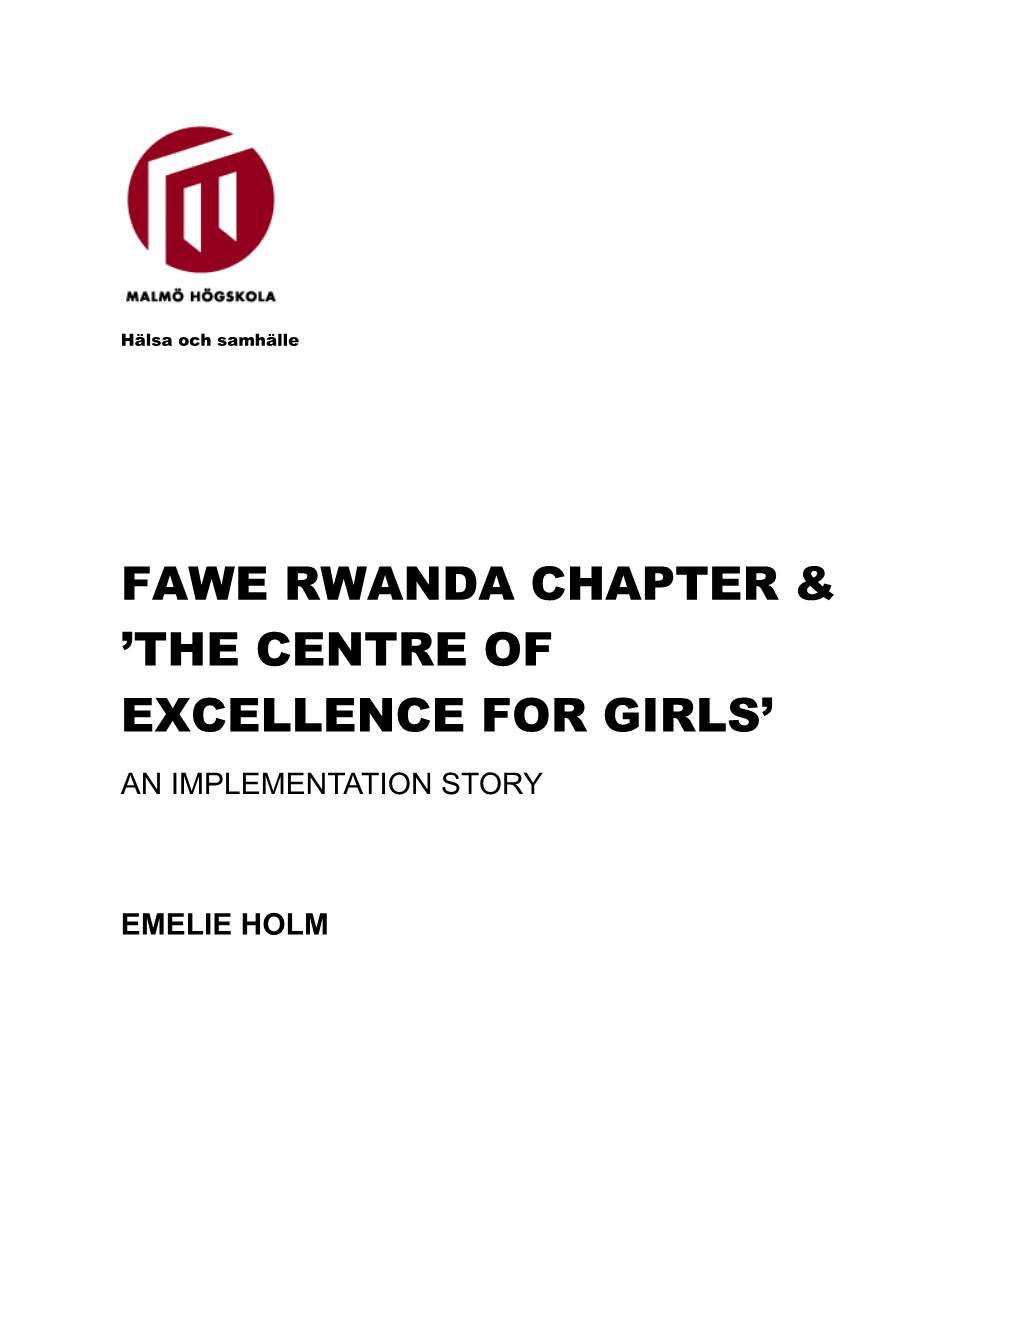 Fawe Rwanda Chapter the Centre of Excellence for Girls